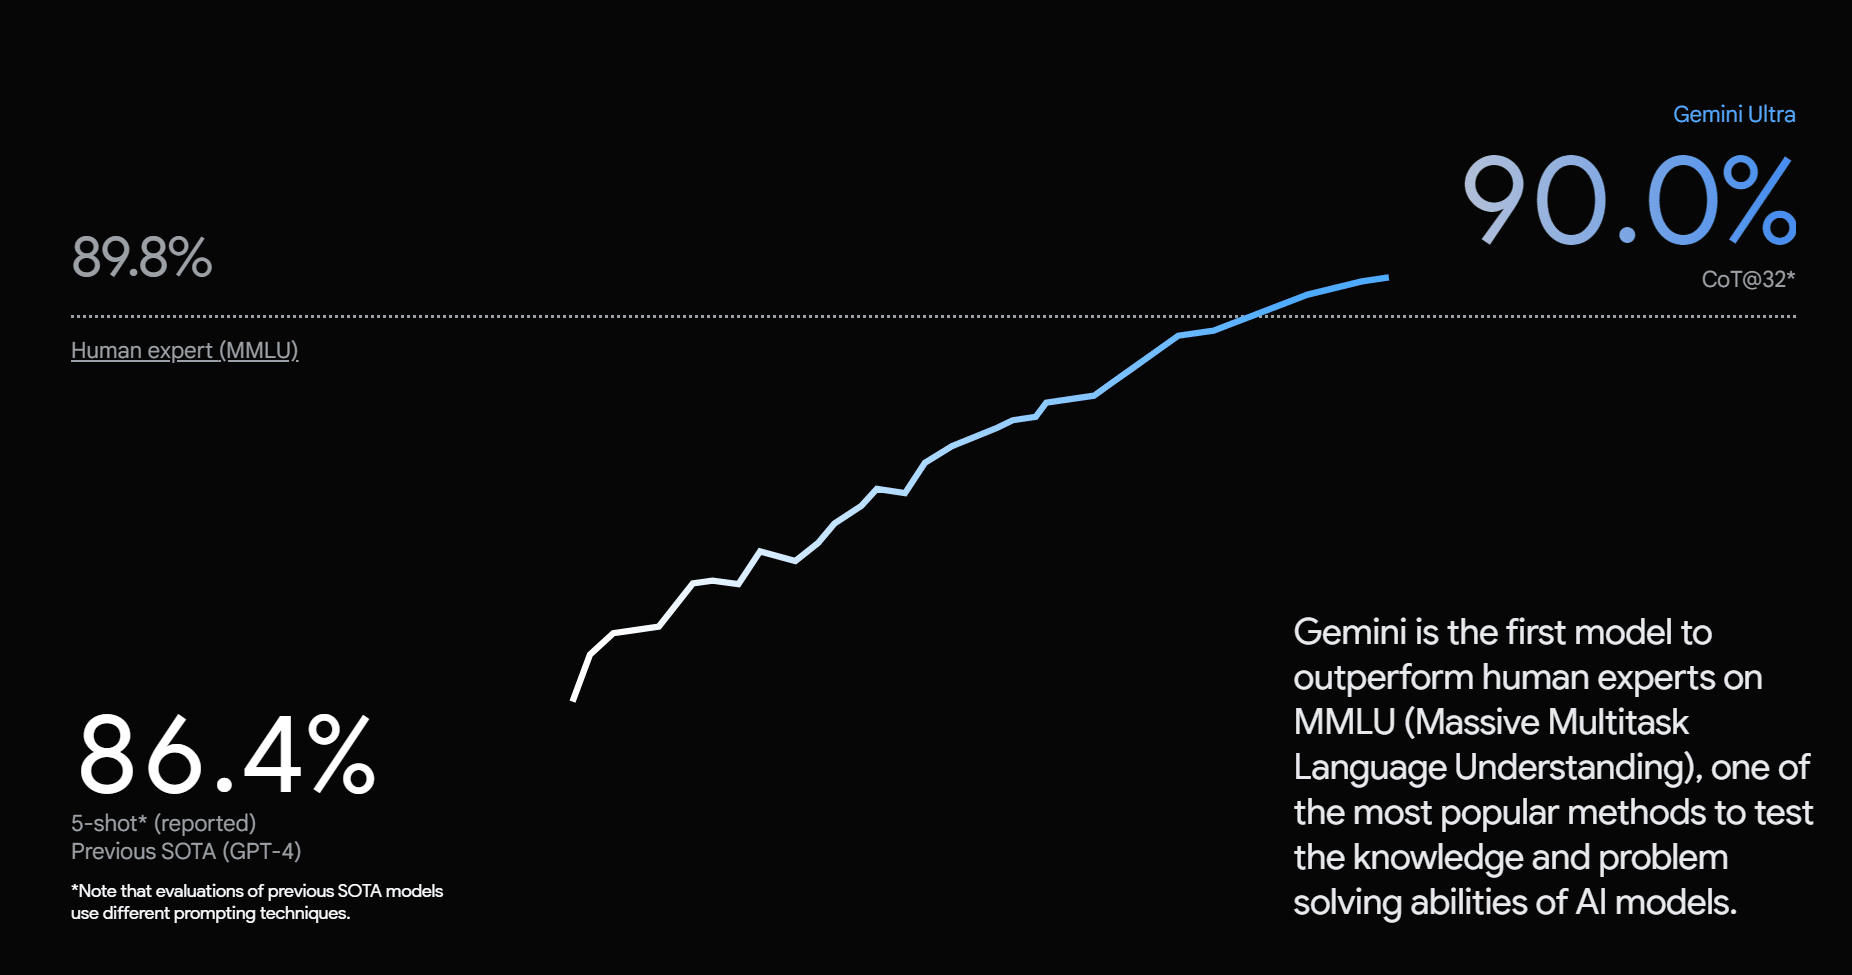 Line graph showing Google Gemini outperforms MMLU with a 90% accuracy compared to MMLU 86.4%